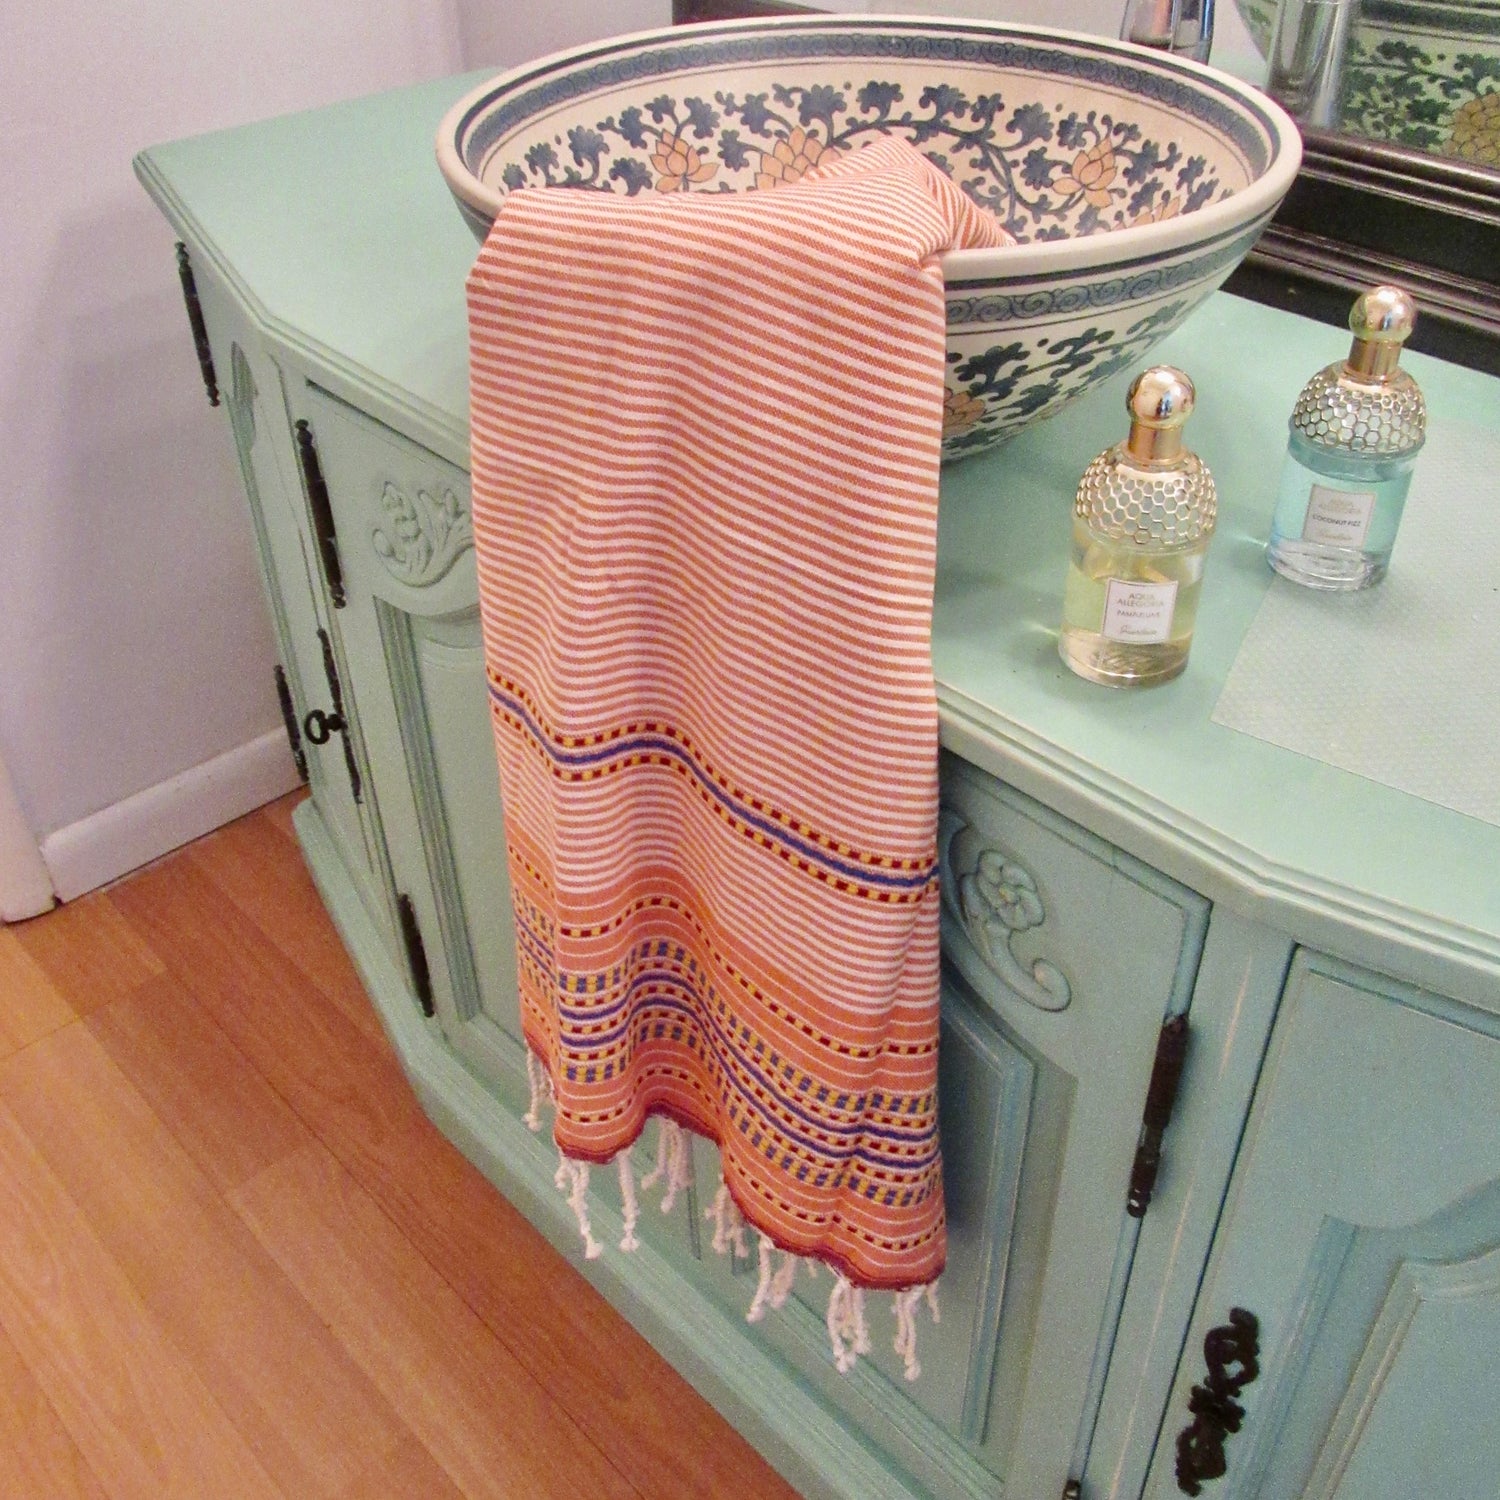 Drying Off With Old, Coarse Towels? Why Turkish Towels Are Your Next Go-To Purchase